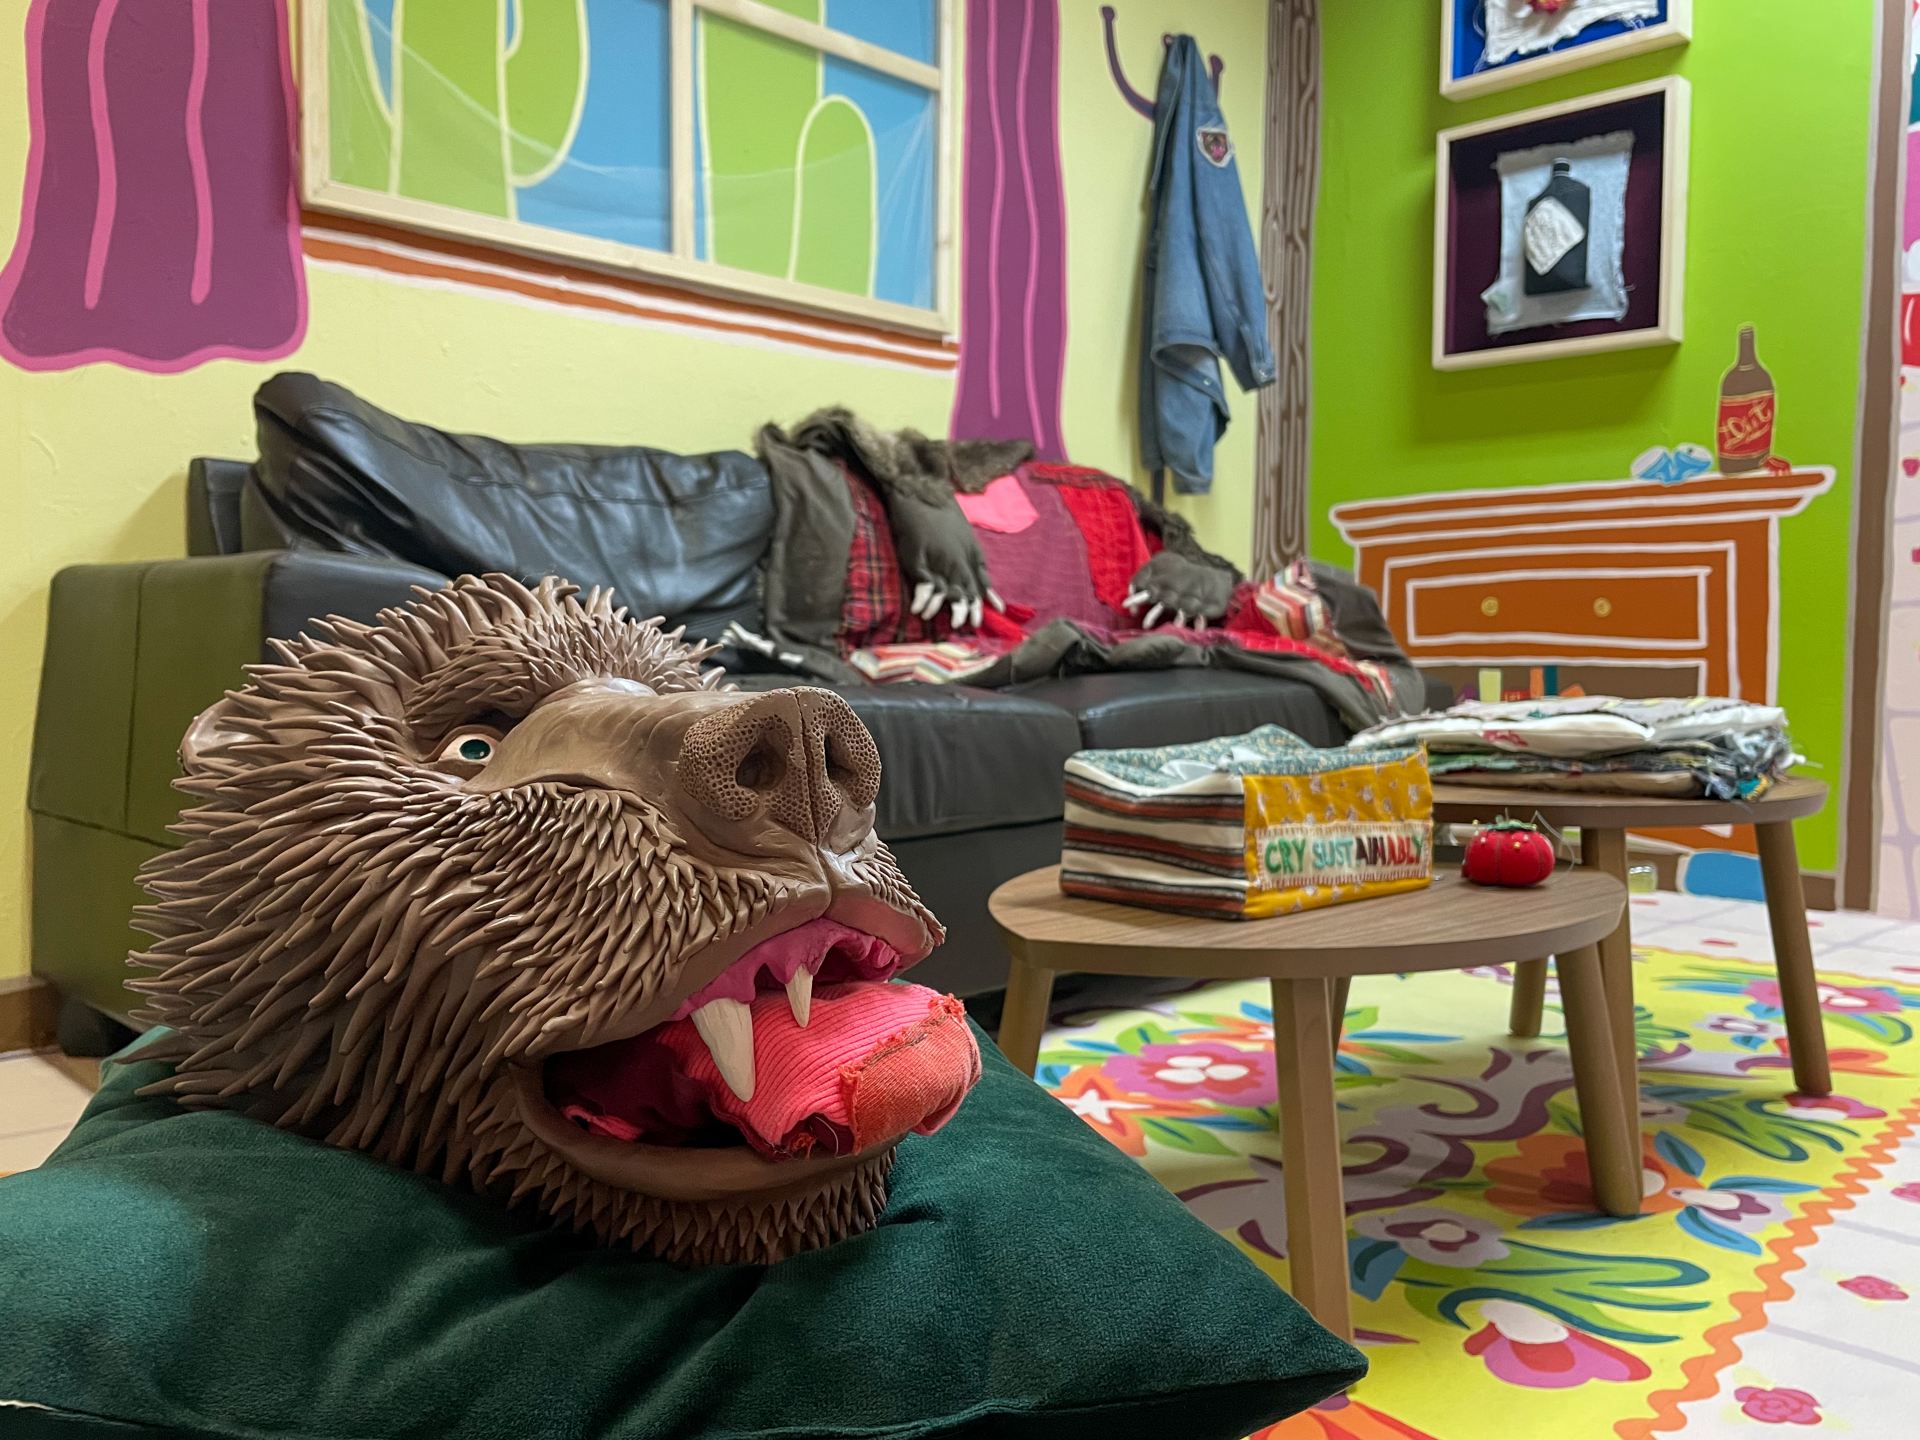 A clay bear head rests in the foreground with a colourful room behind him.